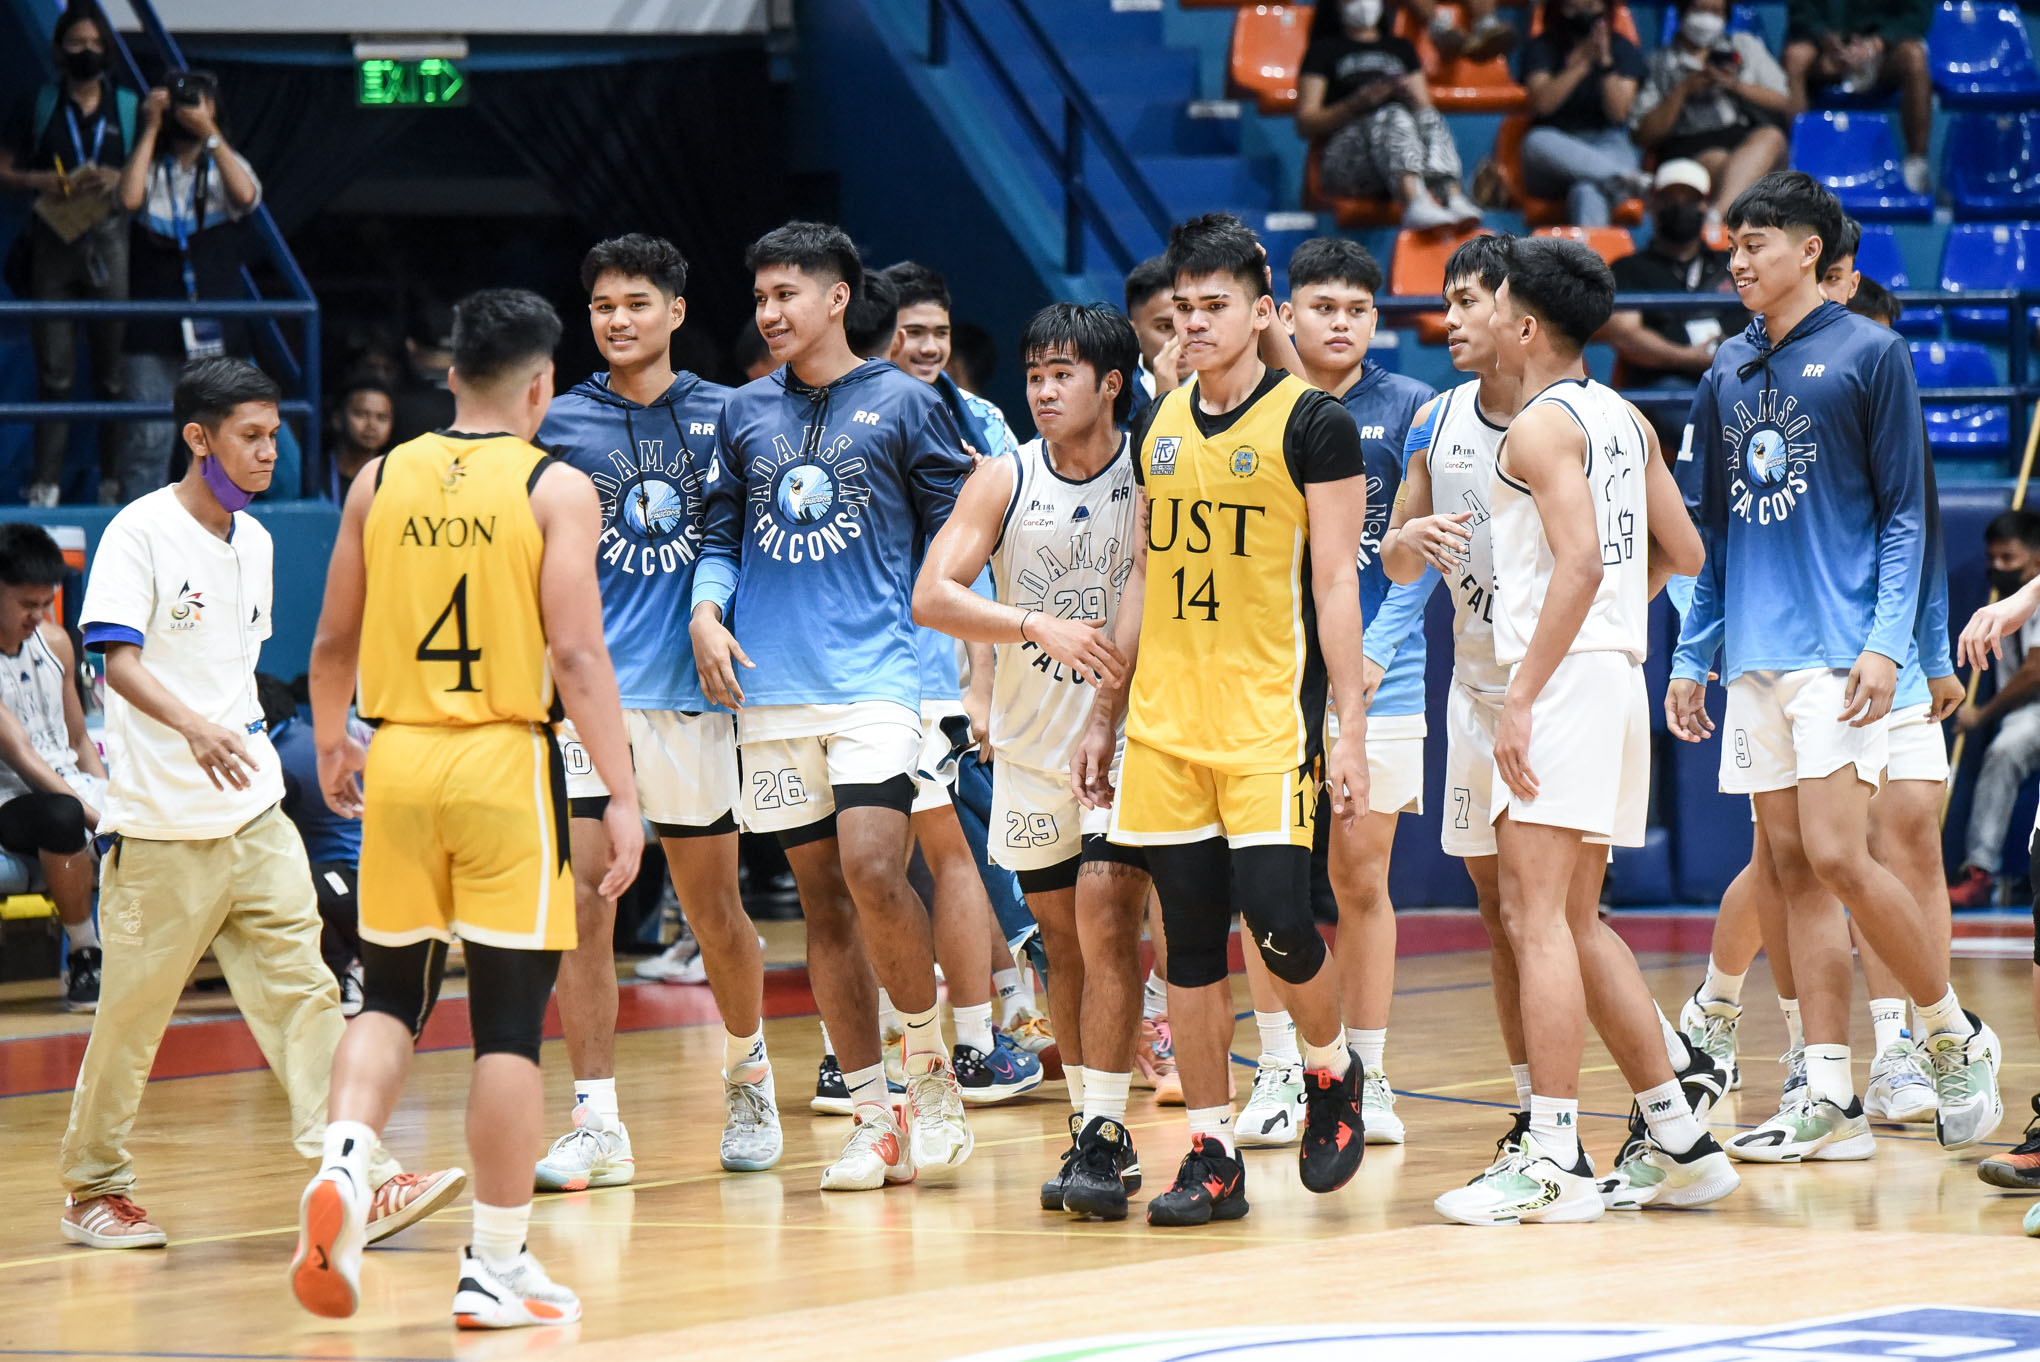 UAAP85-HSBB-PETER-ROSILLO-MARK-LLEMIT-0556 Manu Inigo set to take over UST Tiger Cubs, Manansala remains as assistant coach Basketball News UAAP UST  - philippine sports news